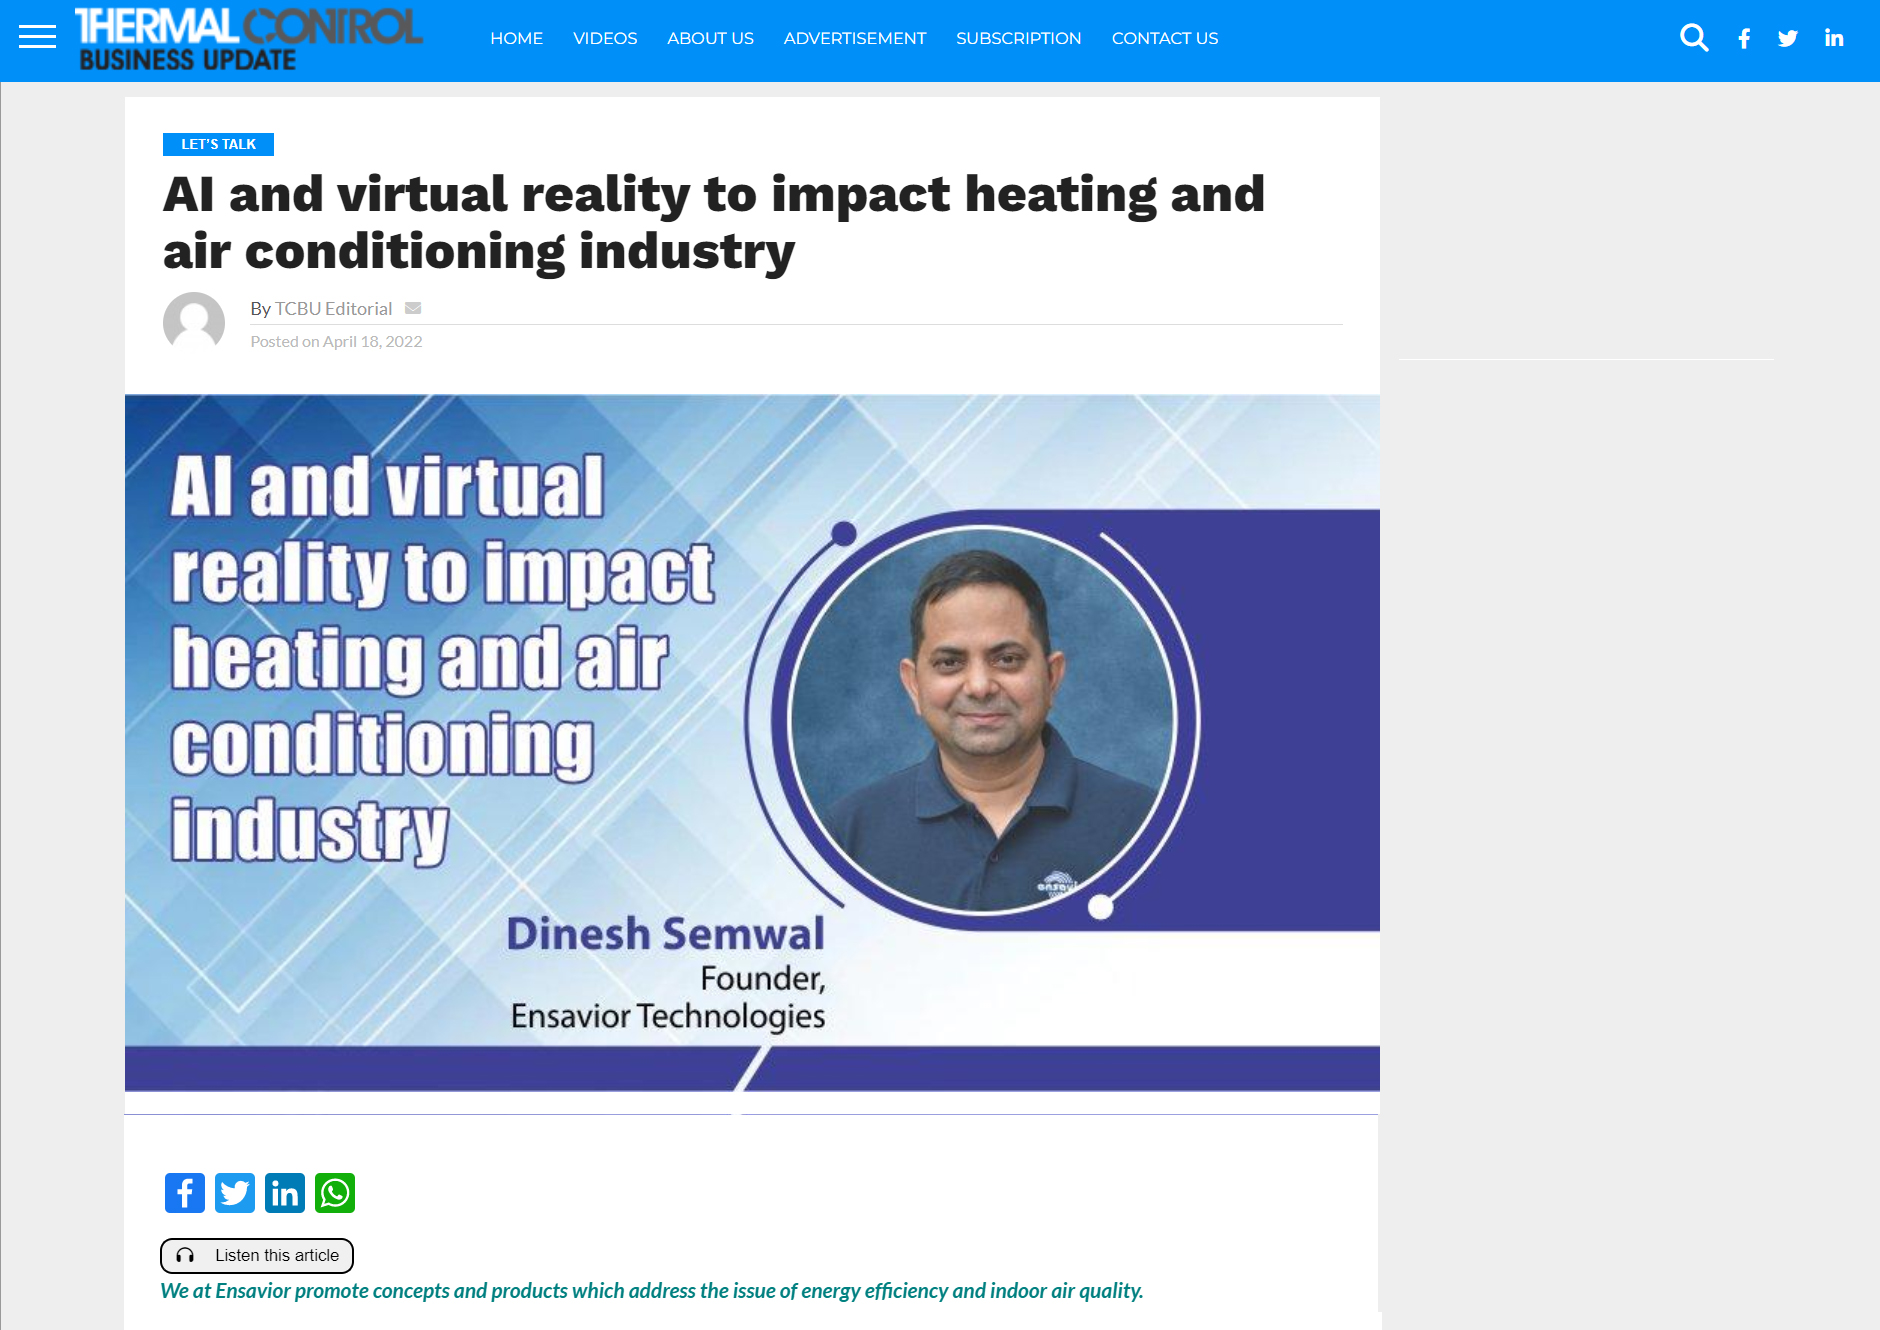 AI and virtual reality to impact heating and air conditioning industry